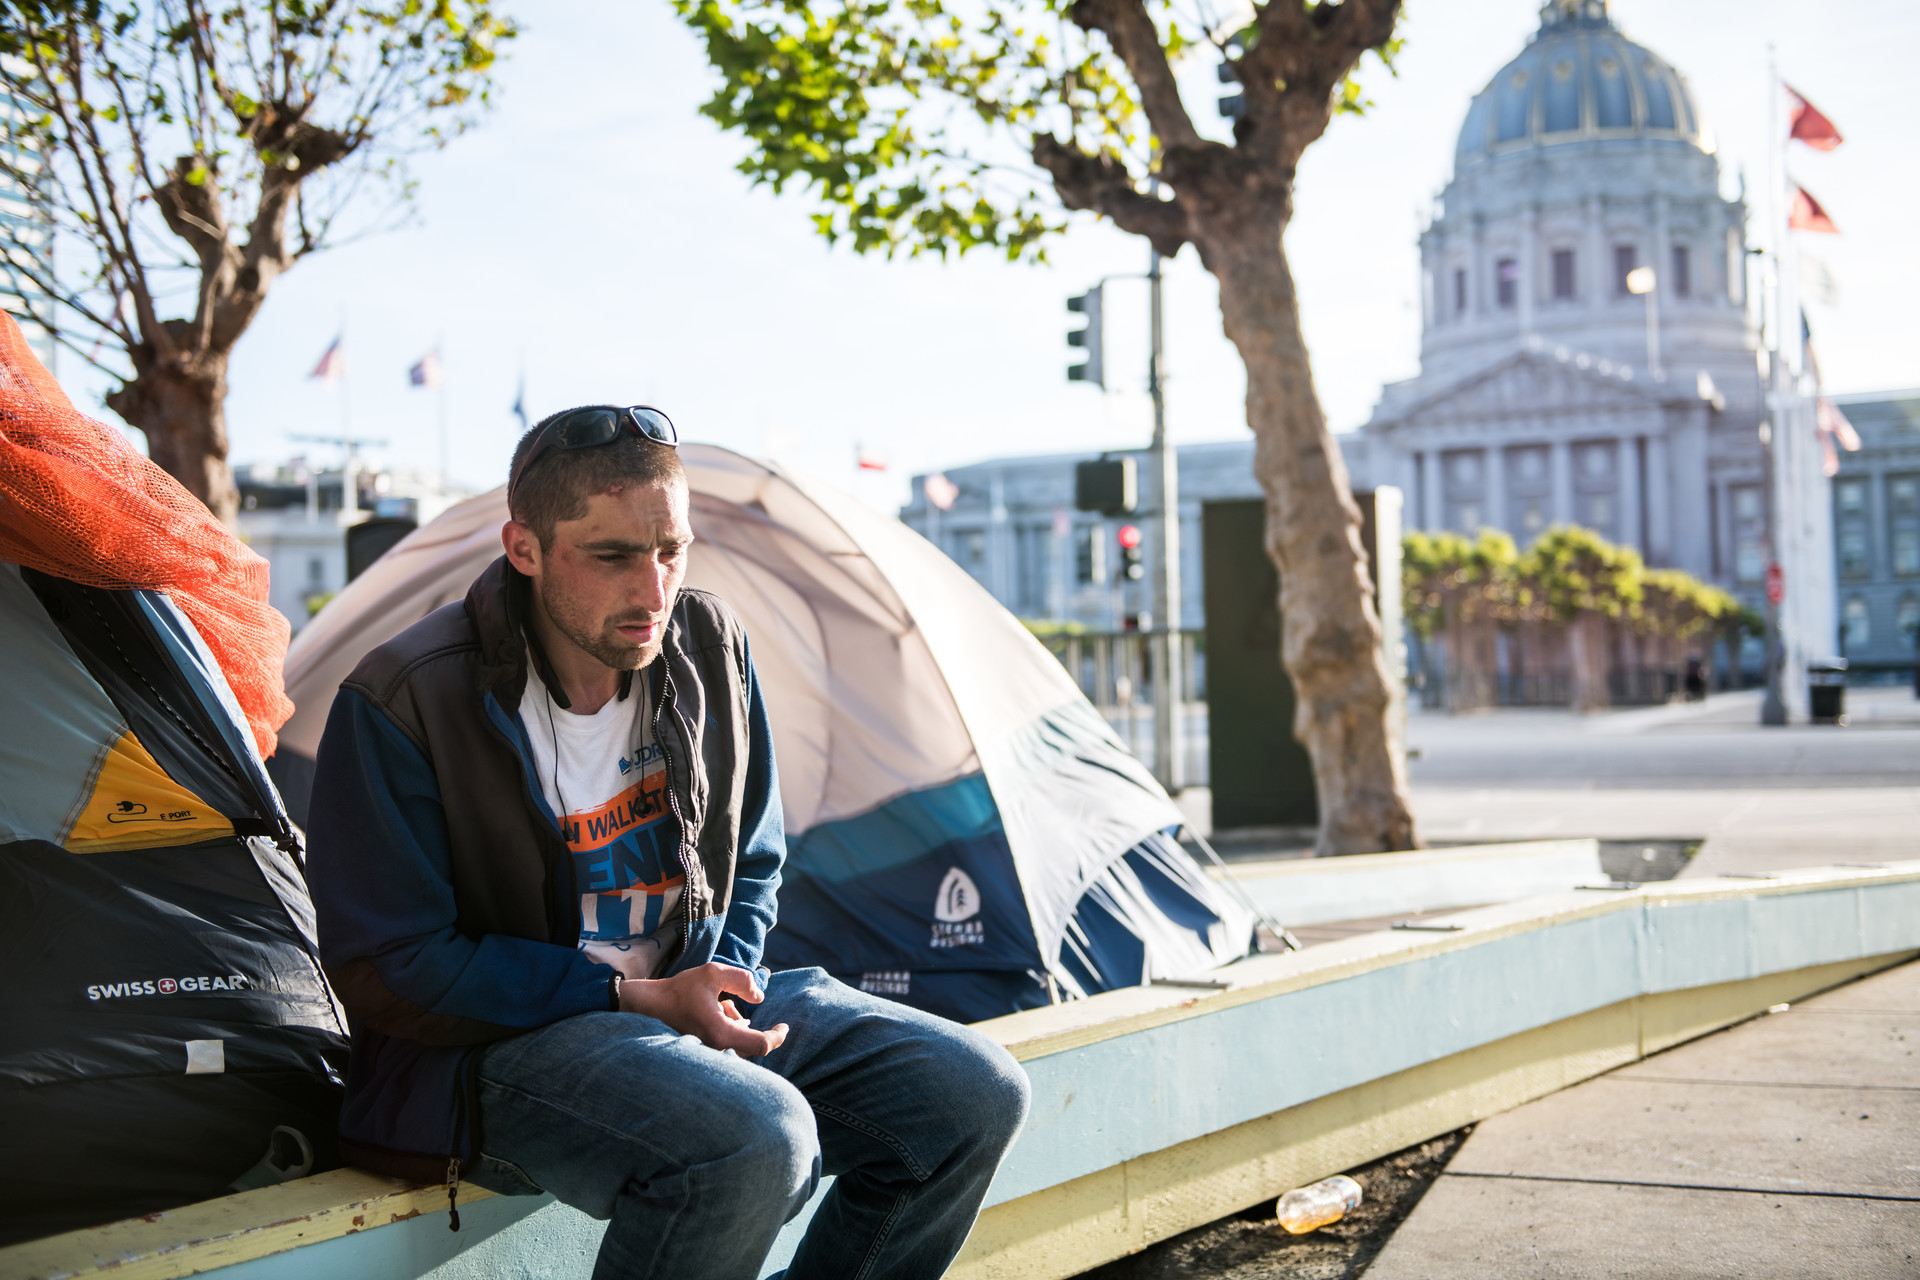 Brandon Conrad at a tent encampment where he currently lives on Fulton Street near City Hall on May 5, 2020.